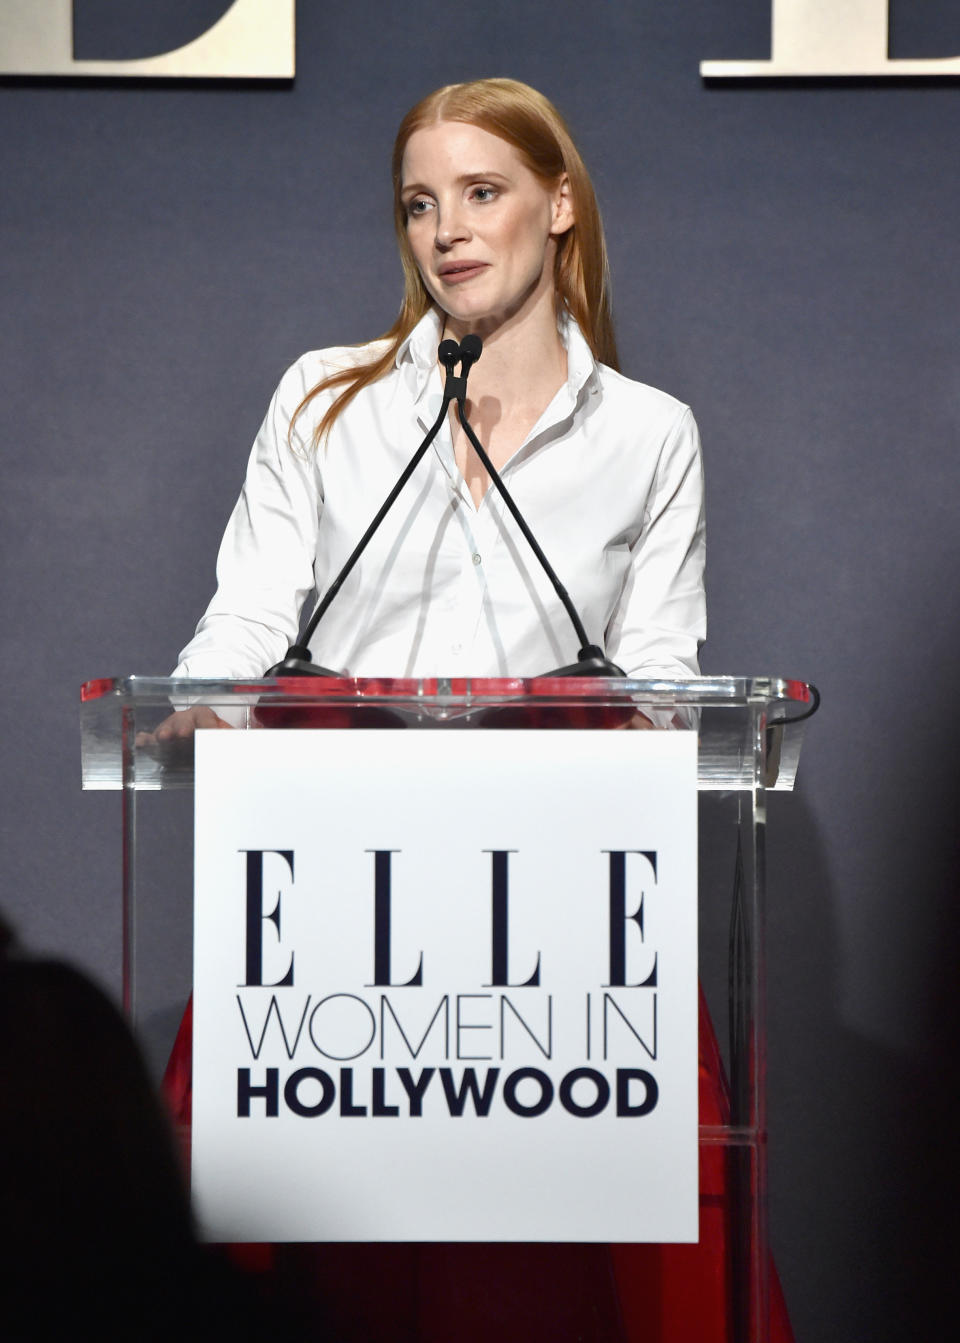 Jessica Chastain speaks at the <em>Elle</em> Women in Hollywood Awards in L.A. on Oct. 16, 2017. (Photo: Getty Images)